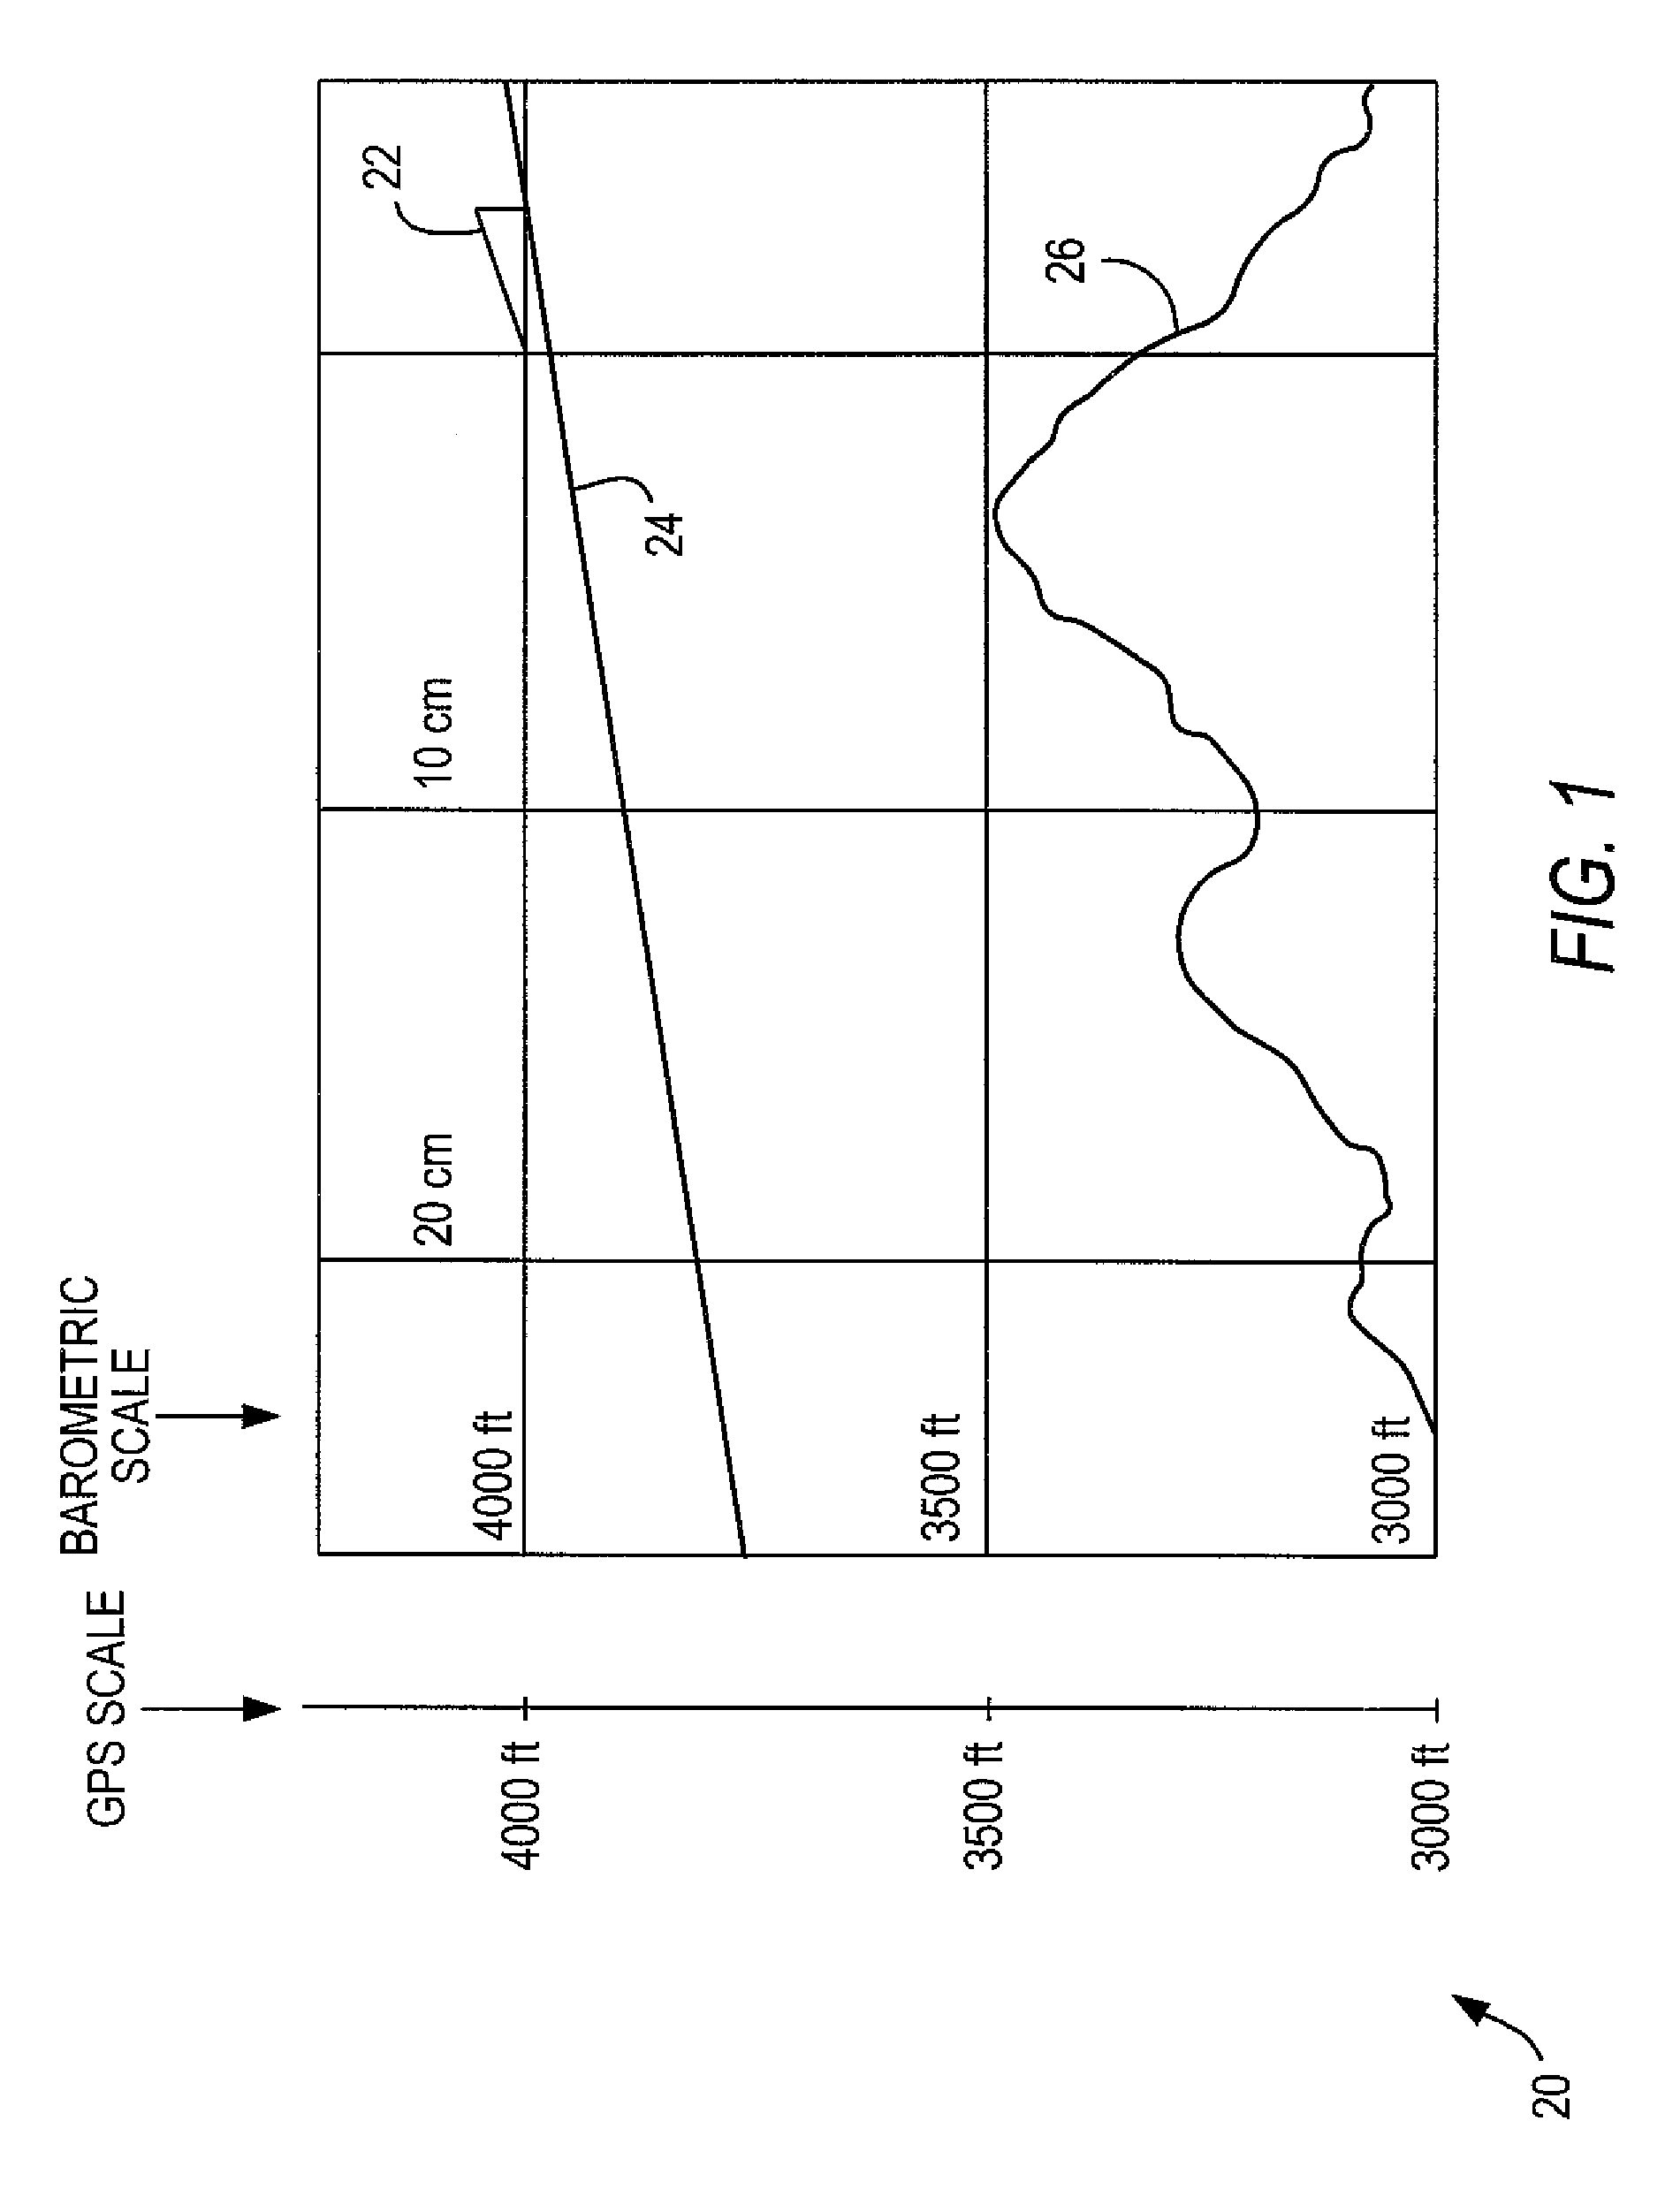 Method for providing terrain alerts and display utilizing temperature compensated and GPS altitude data